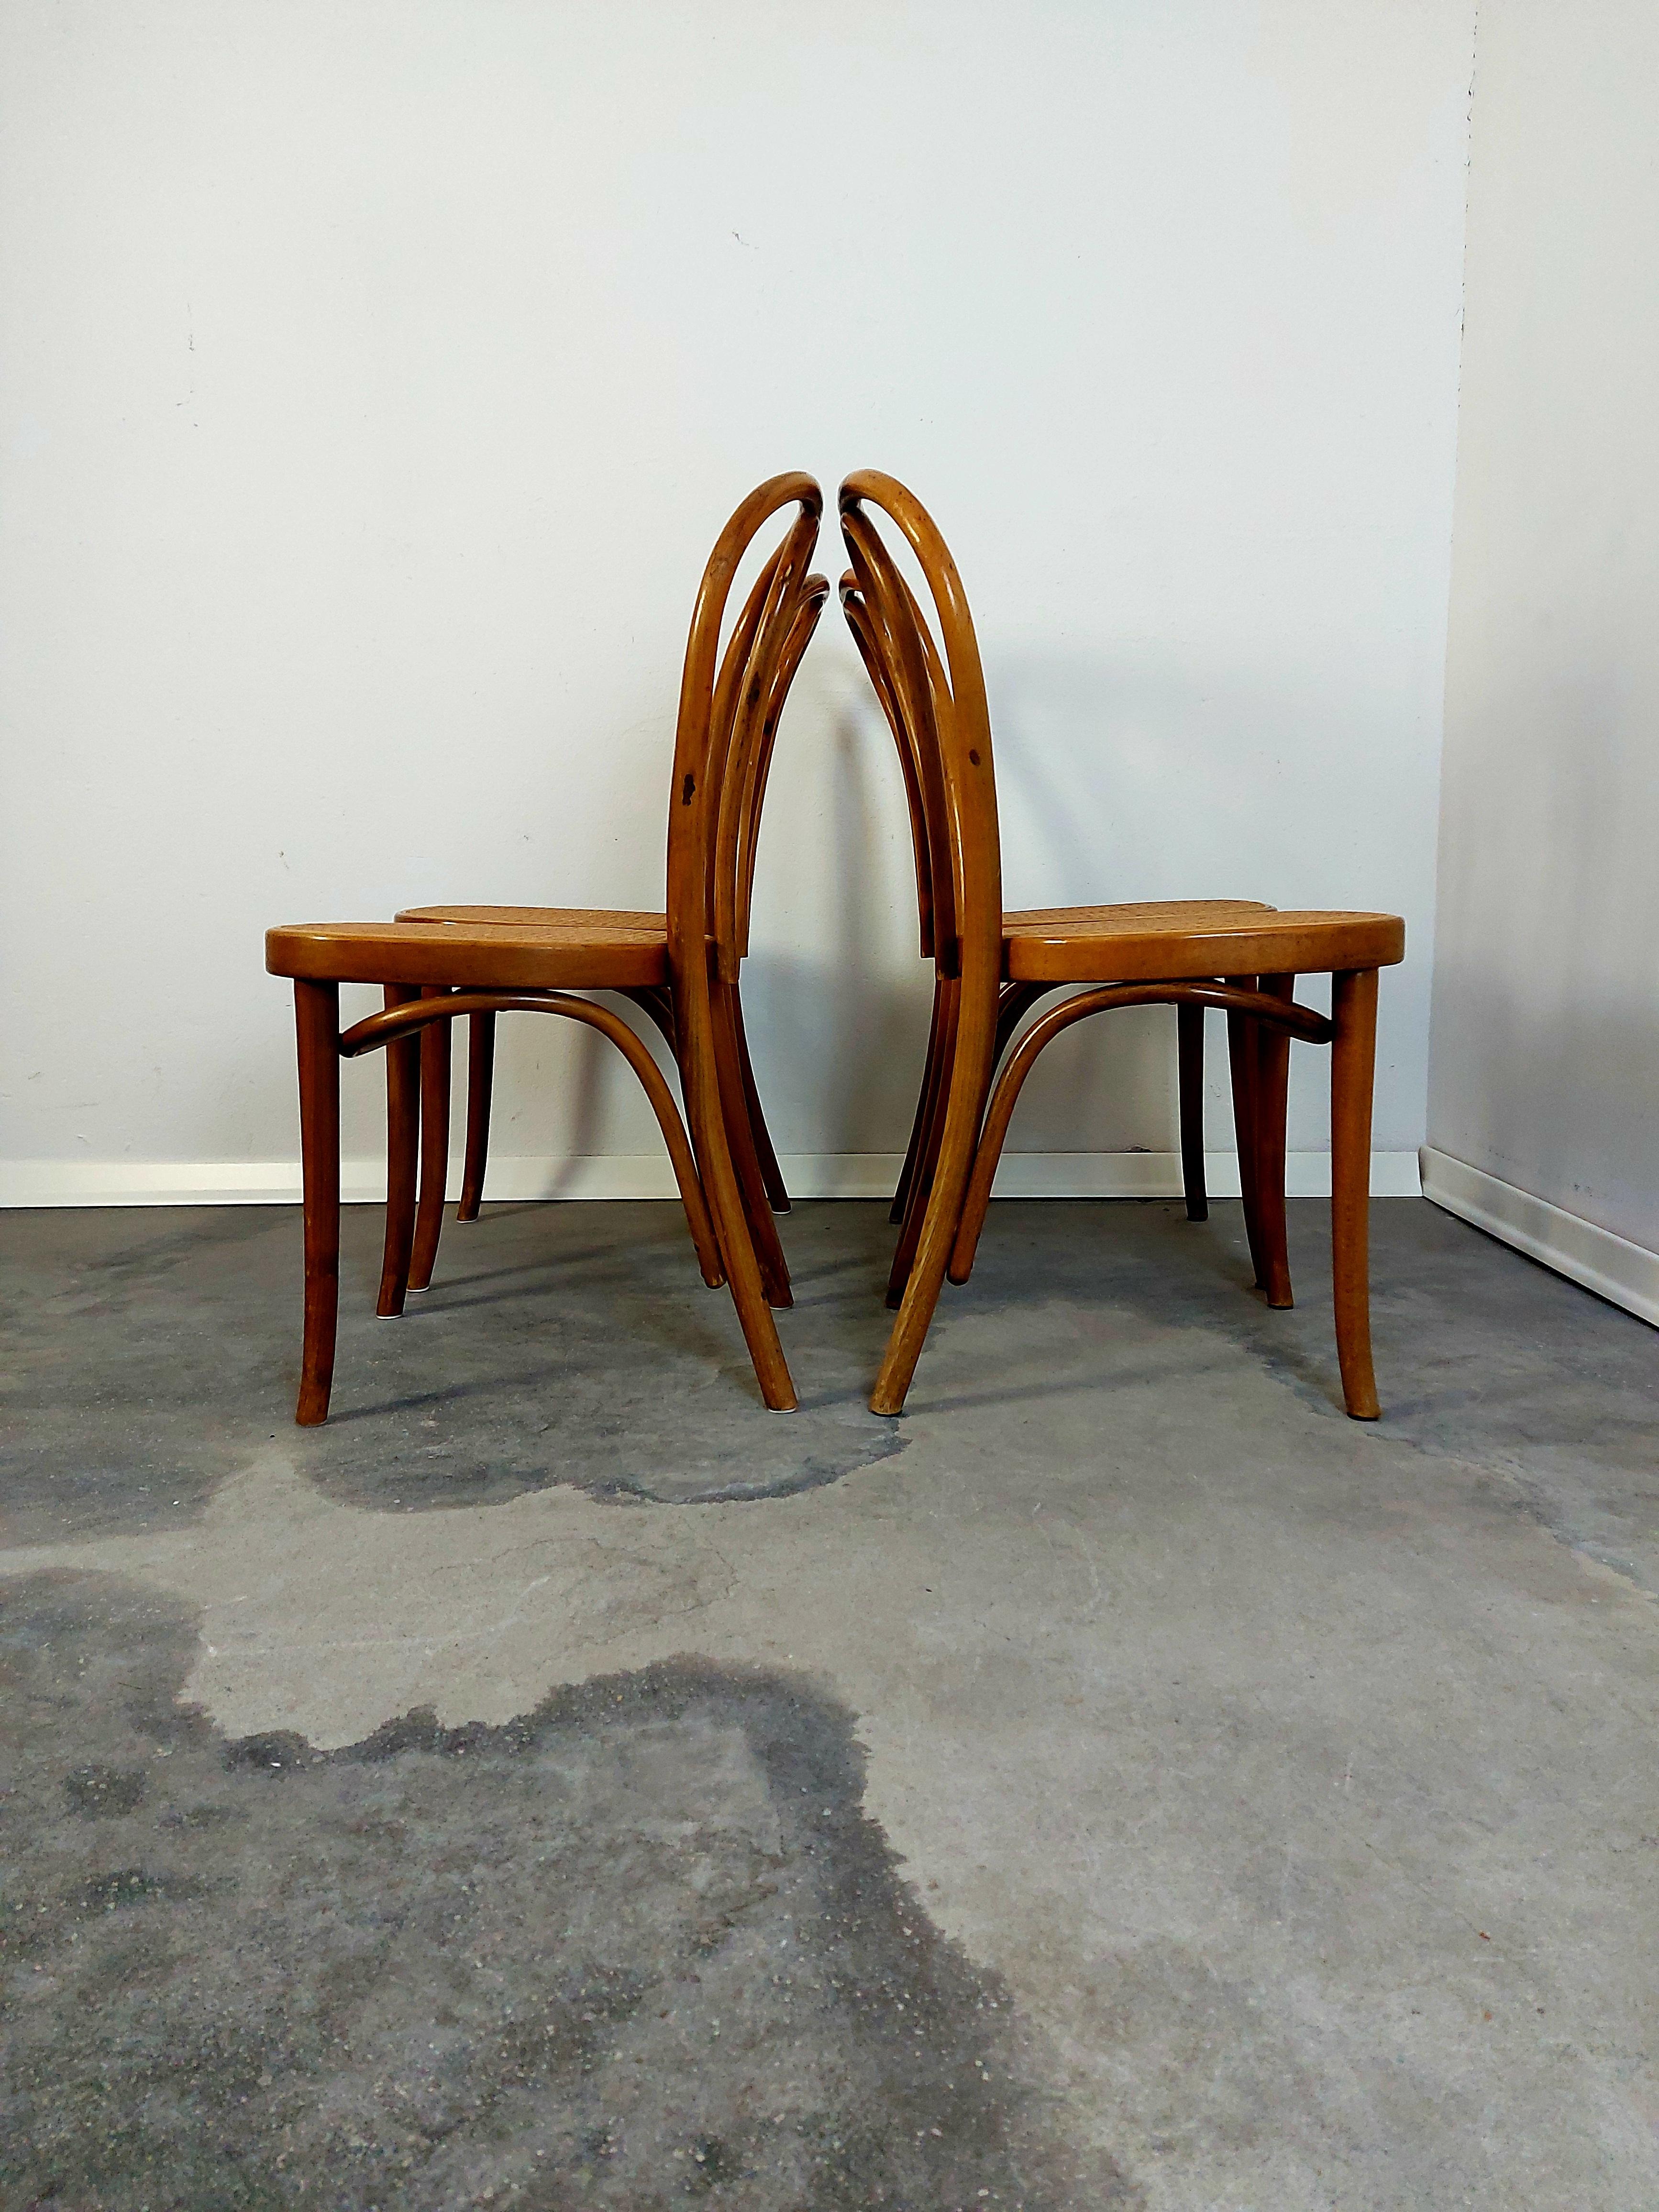 1 of 4, Dining chair, Bentwood cane, No. 18, 1960s 1